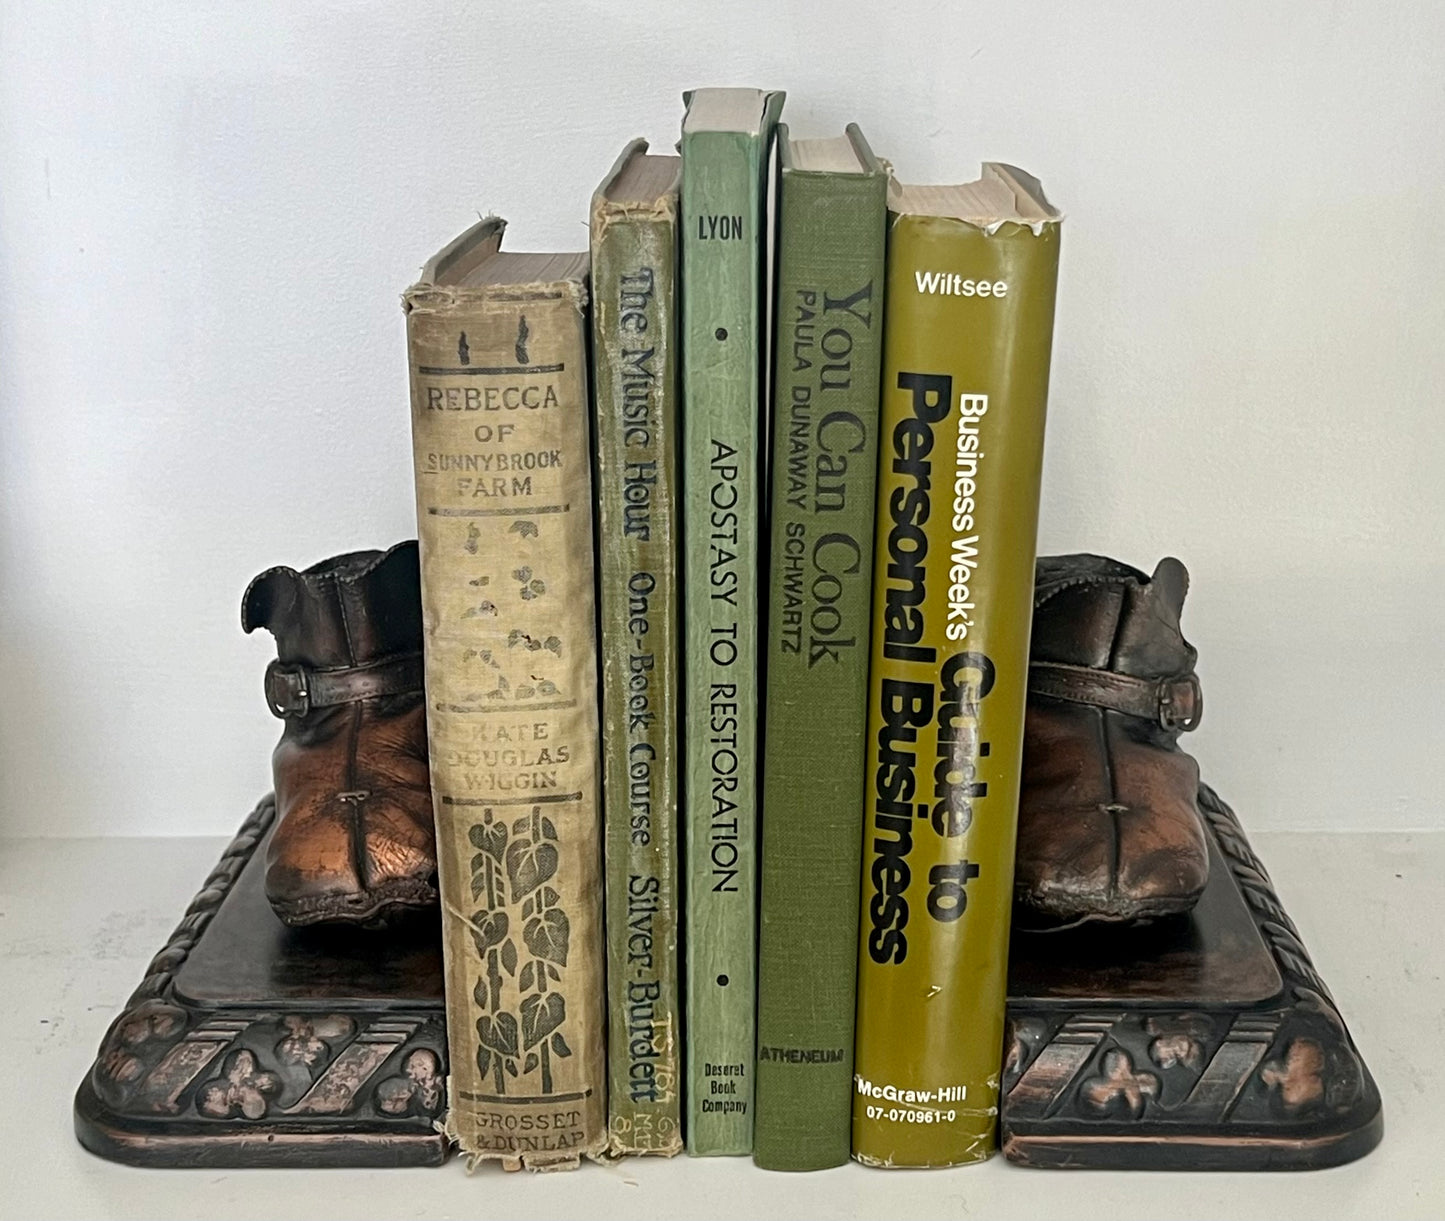 Vintage Bronzed Baby Shoes Book Ends